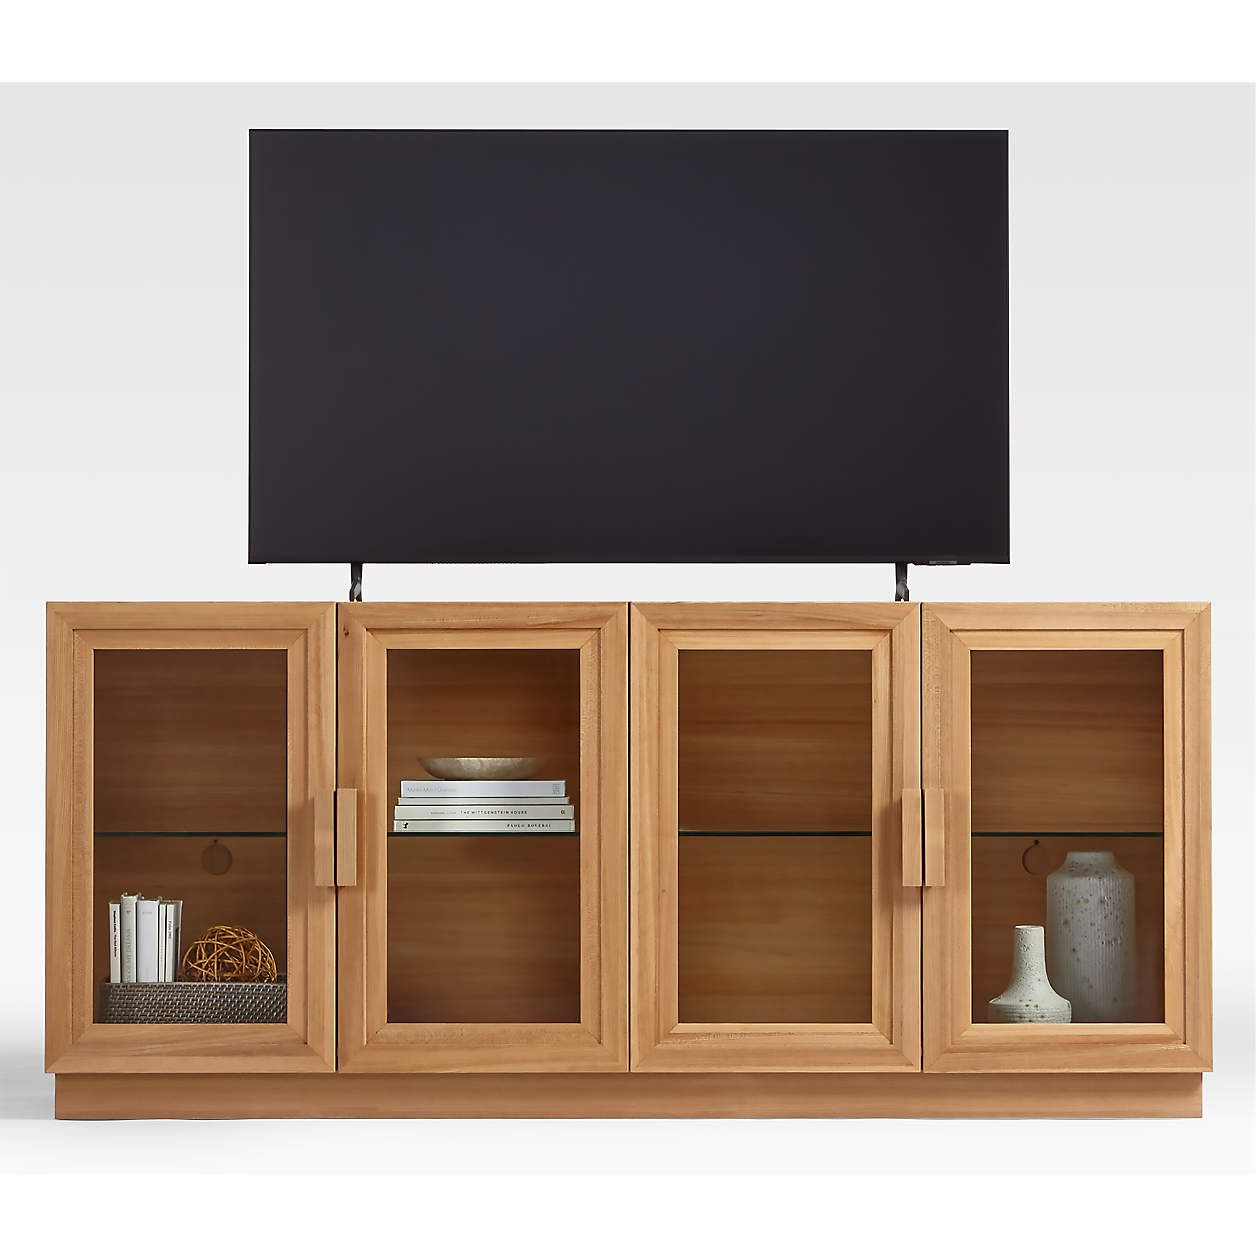 Calypso Ebonized Wood 72" Media Console with Glass Doors | Crate and Barrel | Crate & Barrel